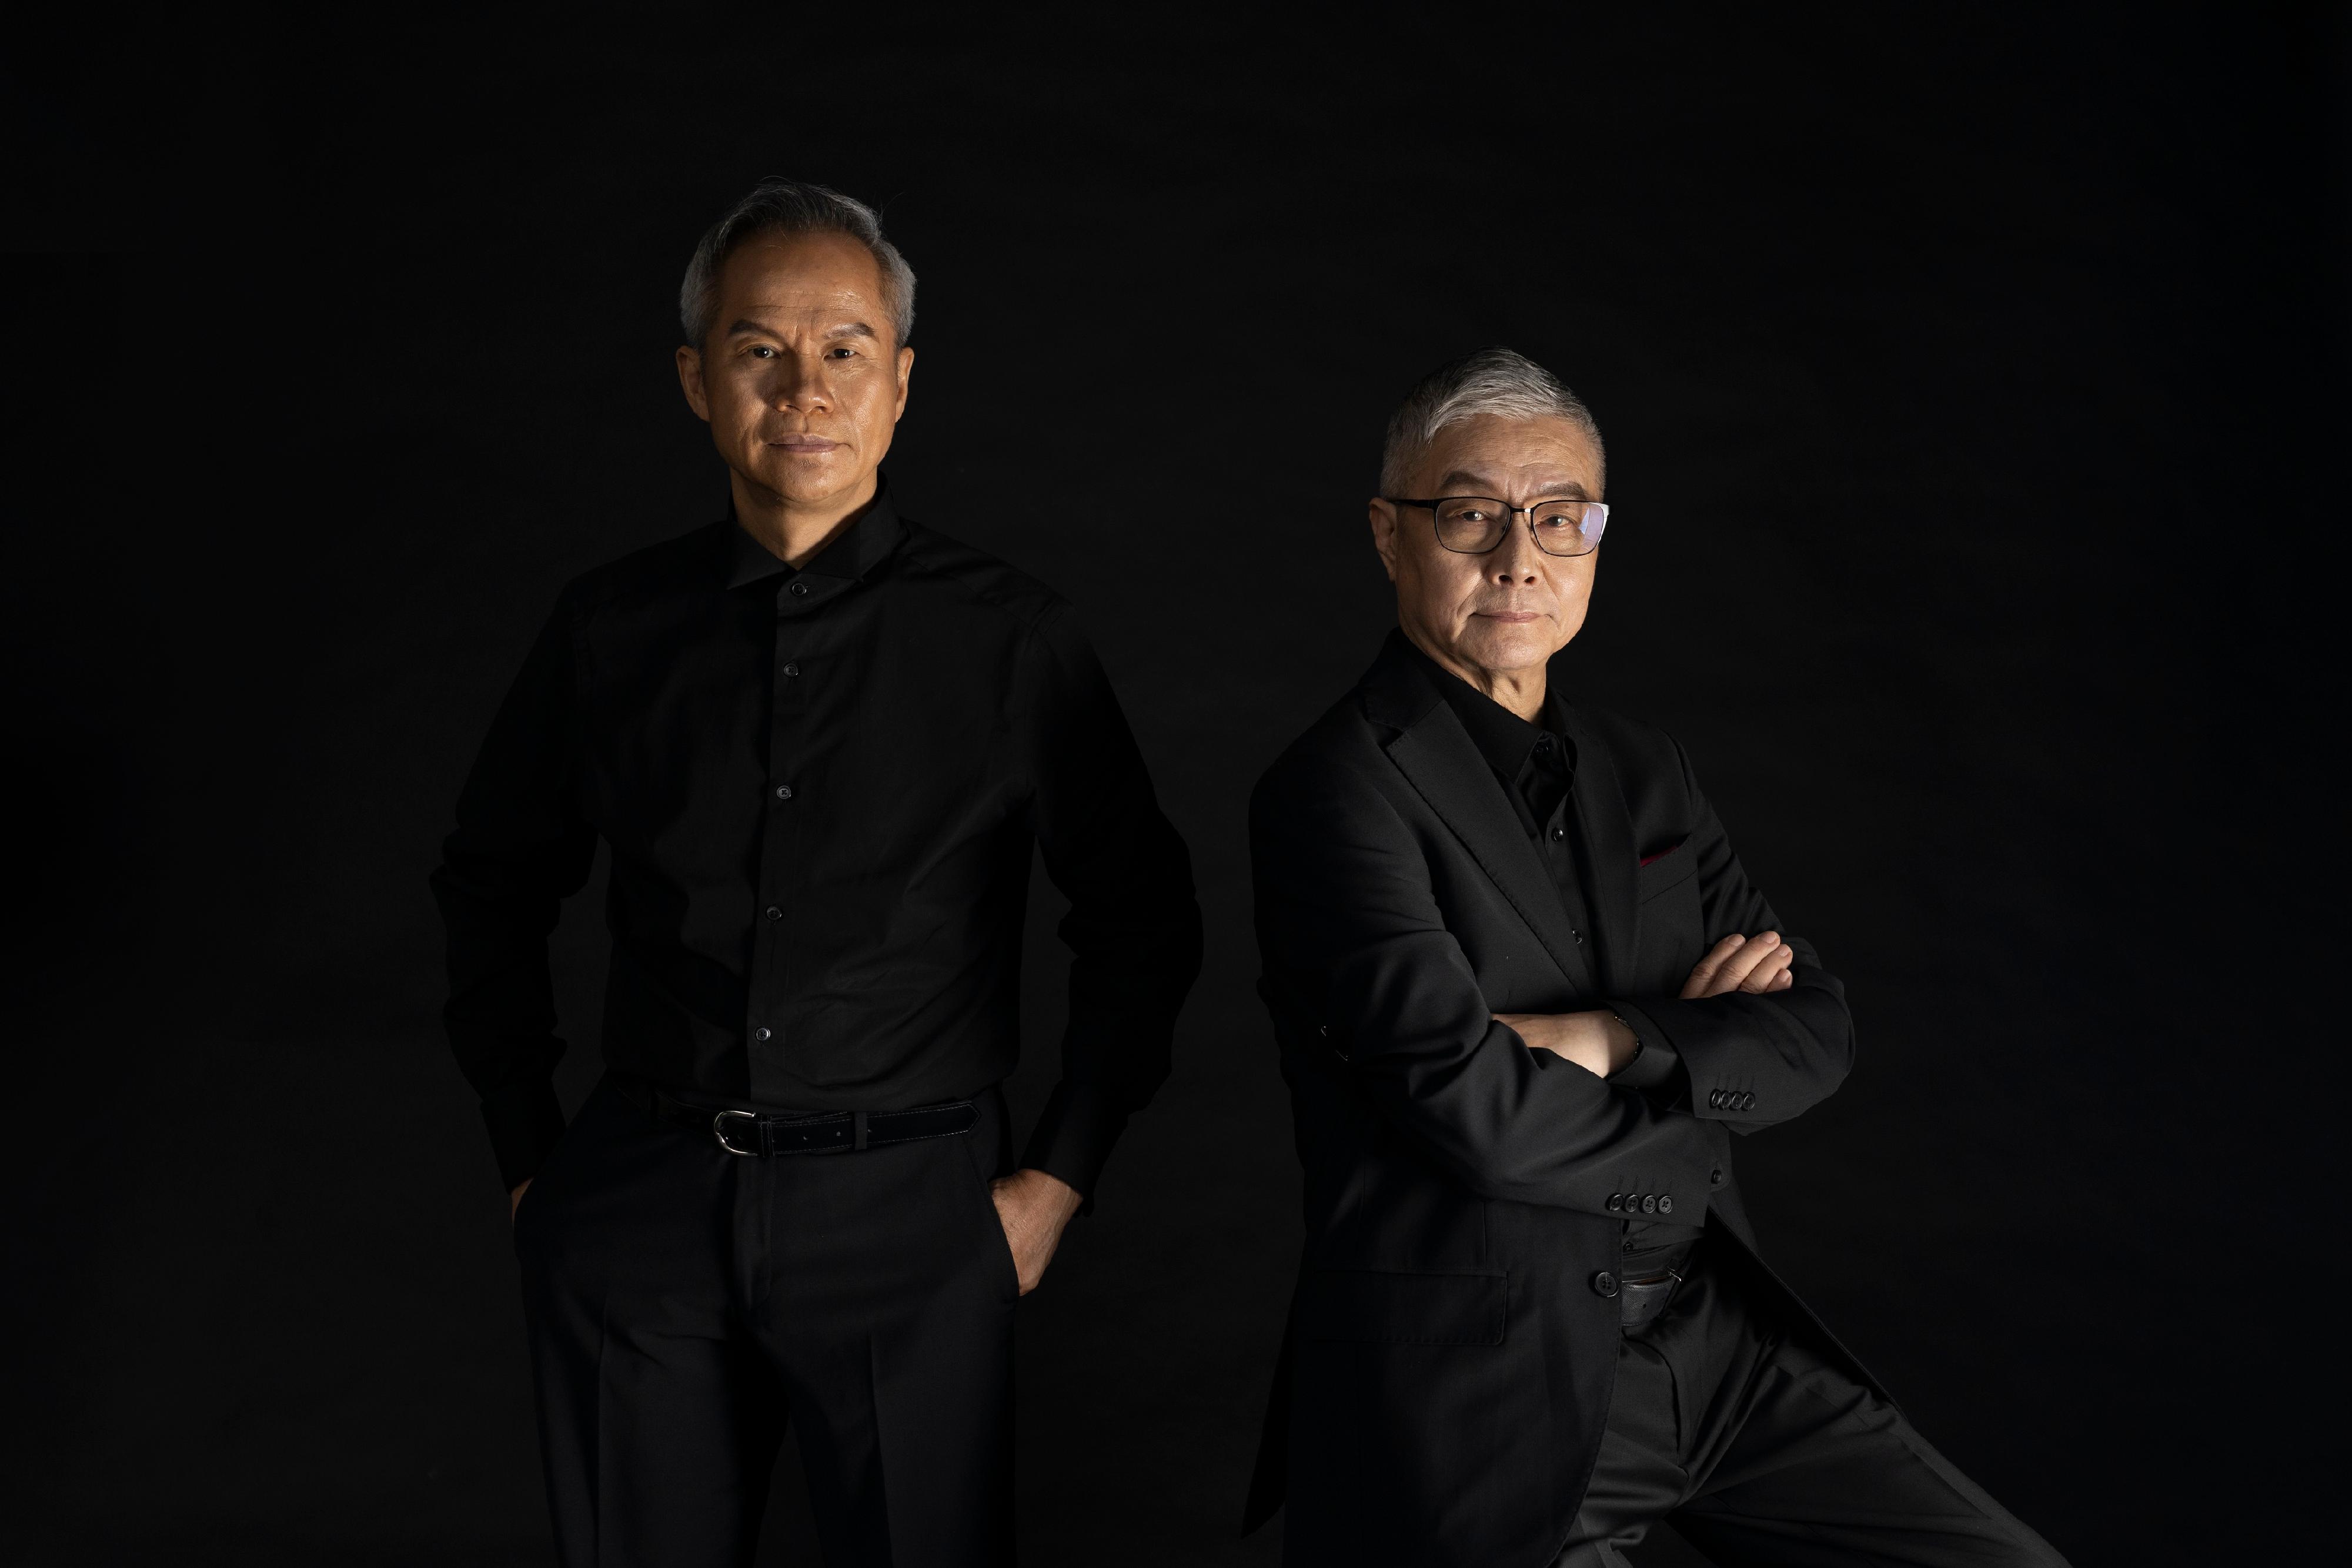 Cantonese opera virtuoso Yuen Siu-fai (right) and theatre master Tang Shu-wing (left) will present the groundbreaking collaboration of "The Old Man and His Sea", a cross-boundary production adapted from Nobel laureate Ernest Hemingway's classic "The Old Man and the Sea", fusing contemporary theatre with Chinese opera. The programme, which is part of the New Vision Arts Festival, will be staged from November 10 to 12 at the Kwai Tsing Theatre Auditorium. (Source of photo: Michael CW Chiu)
